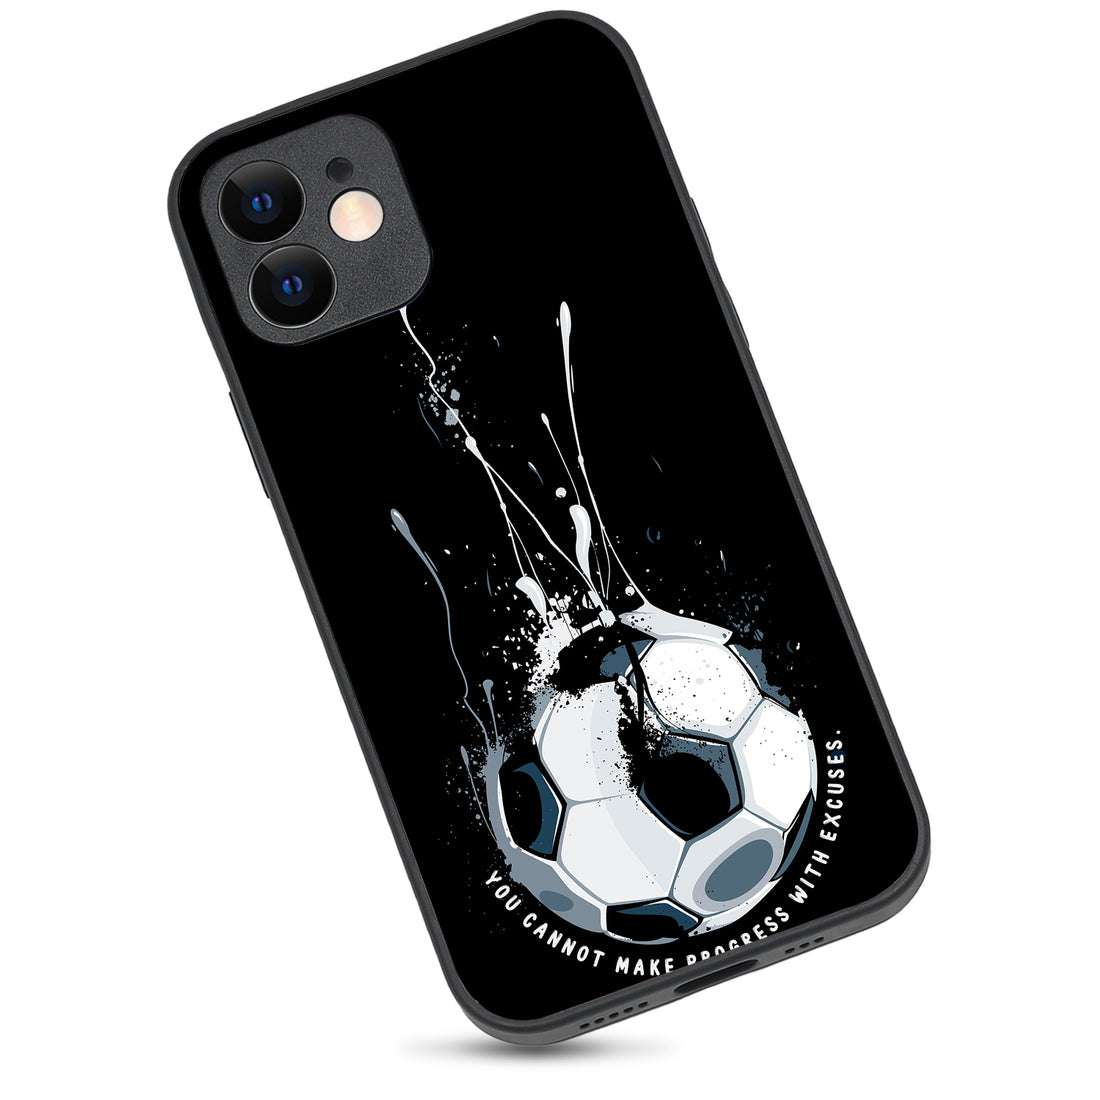 Football Quote Sports iPhone 12 Case